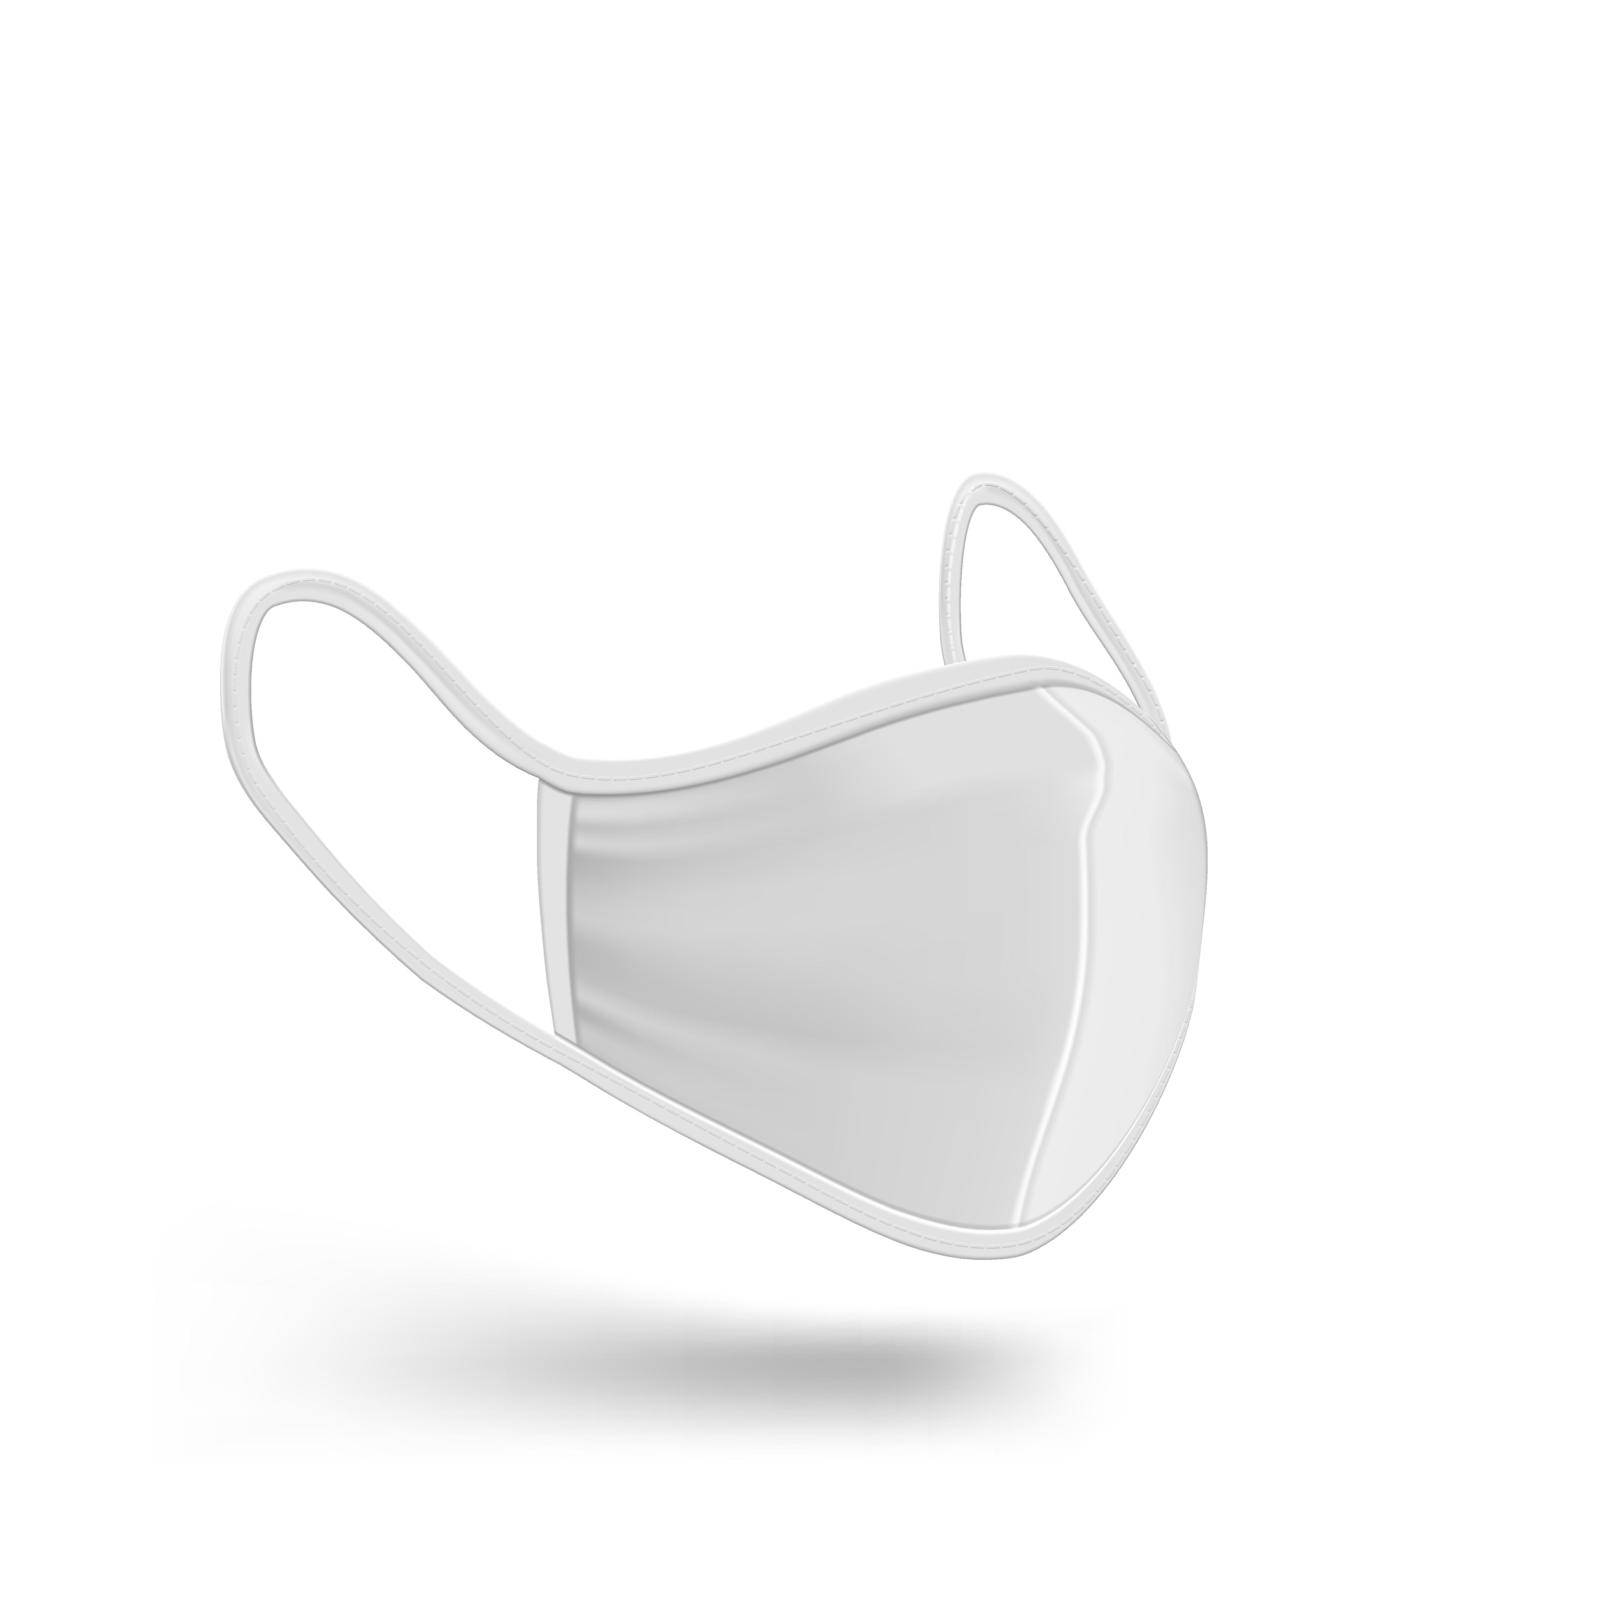 Clear White Fabric Protection Face Mask Mockup. EPS10 Vector